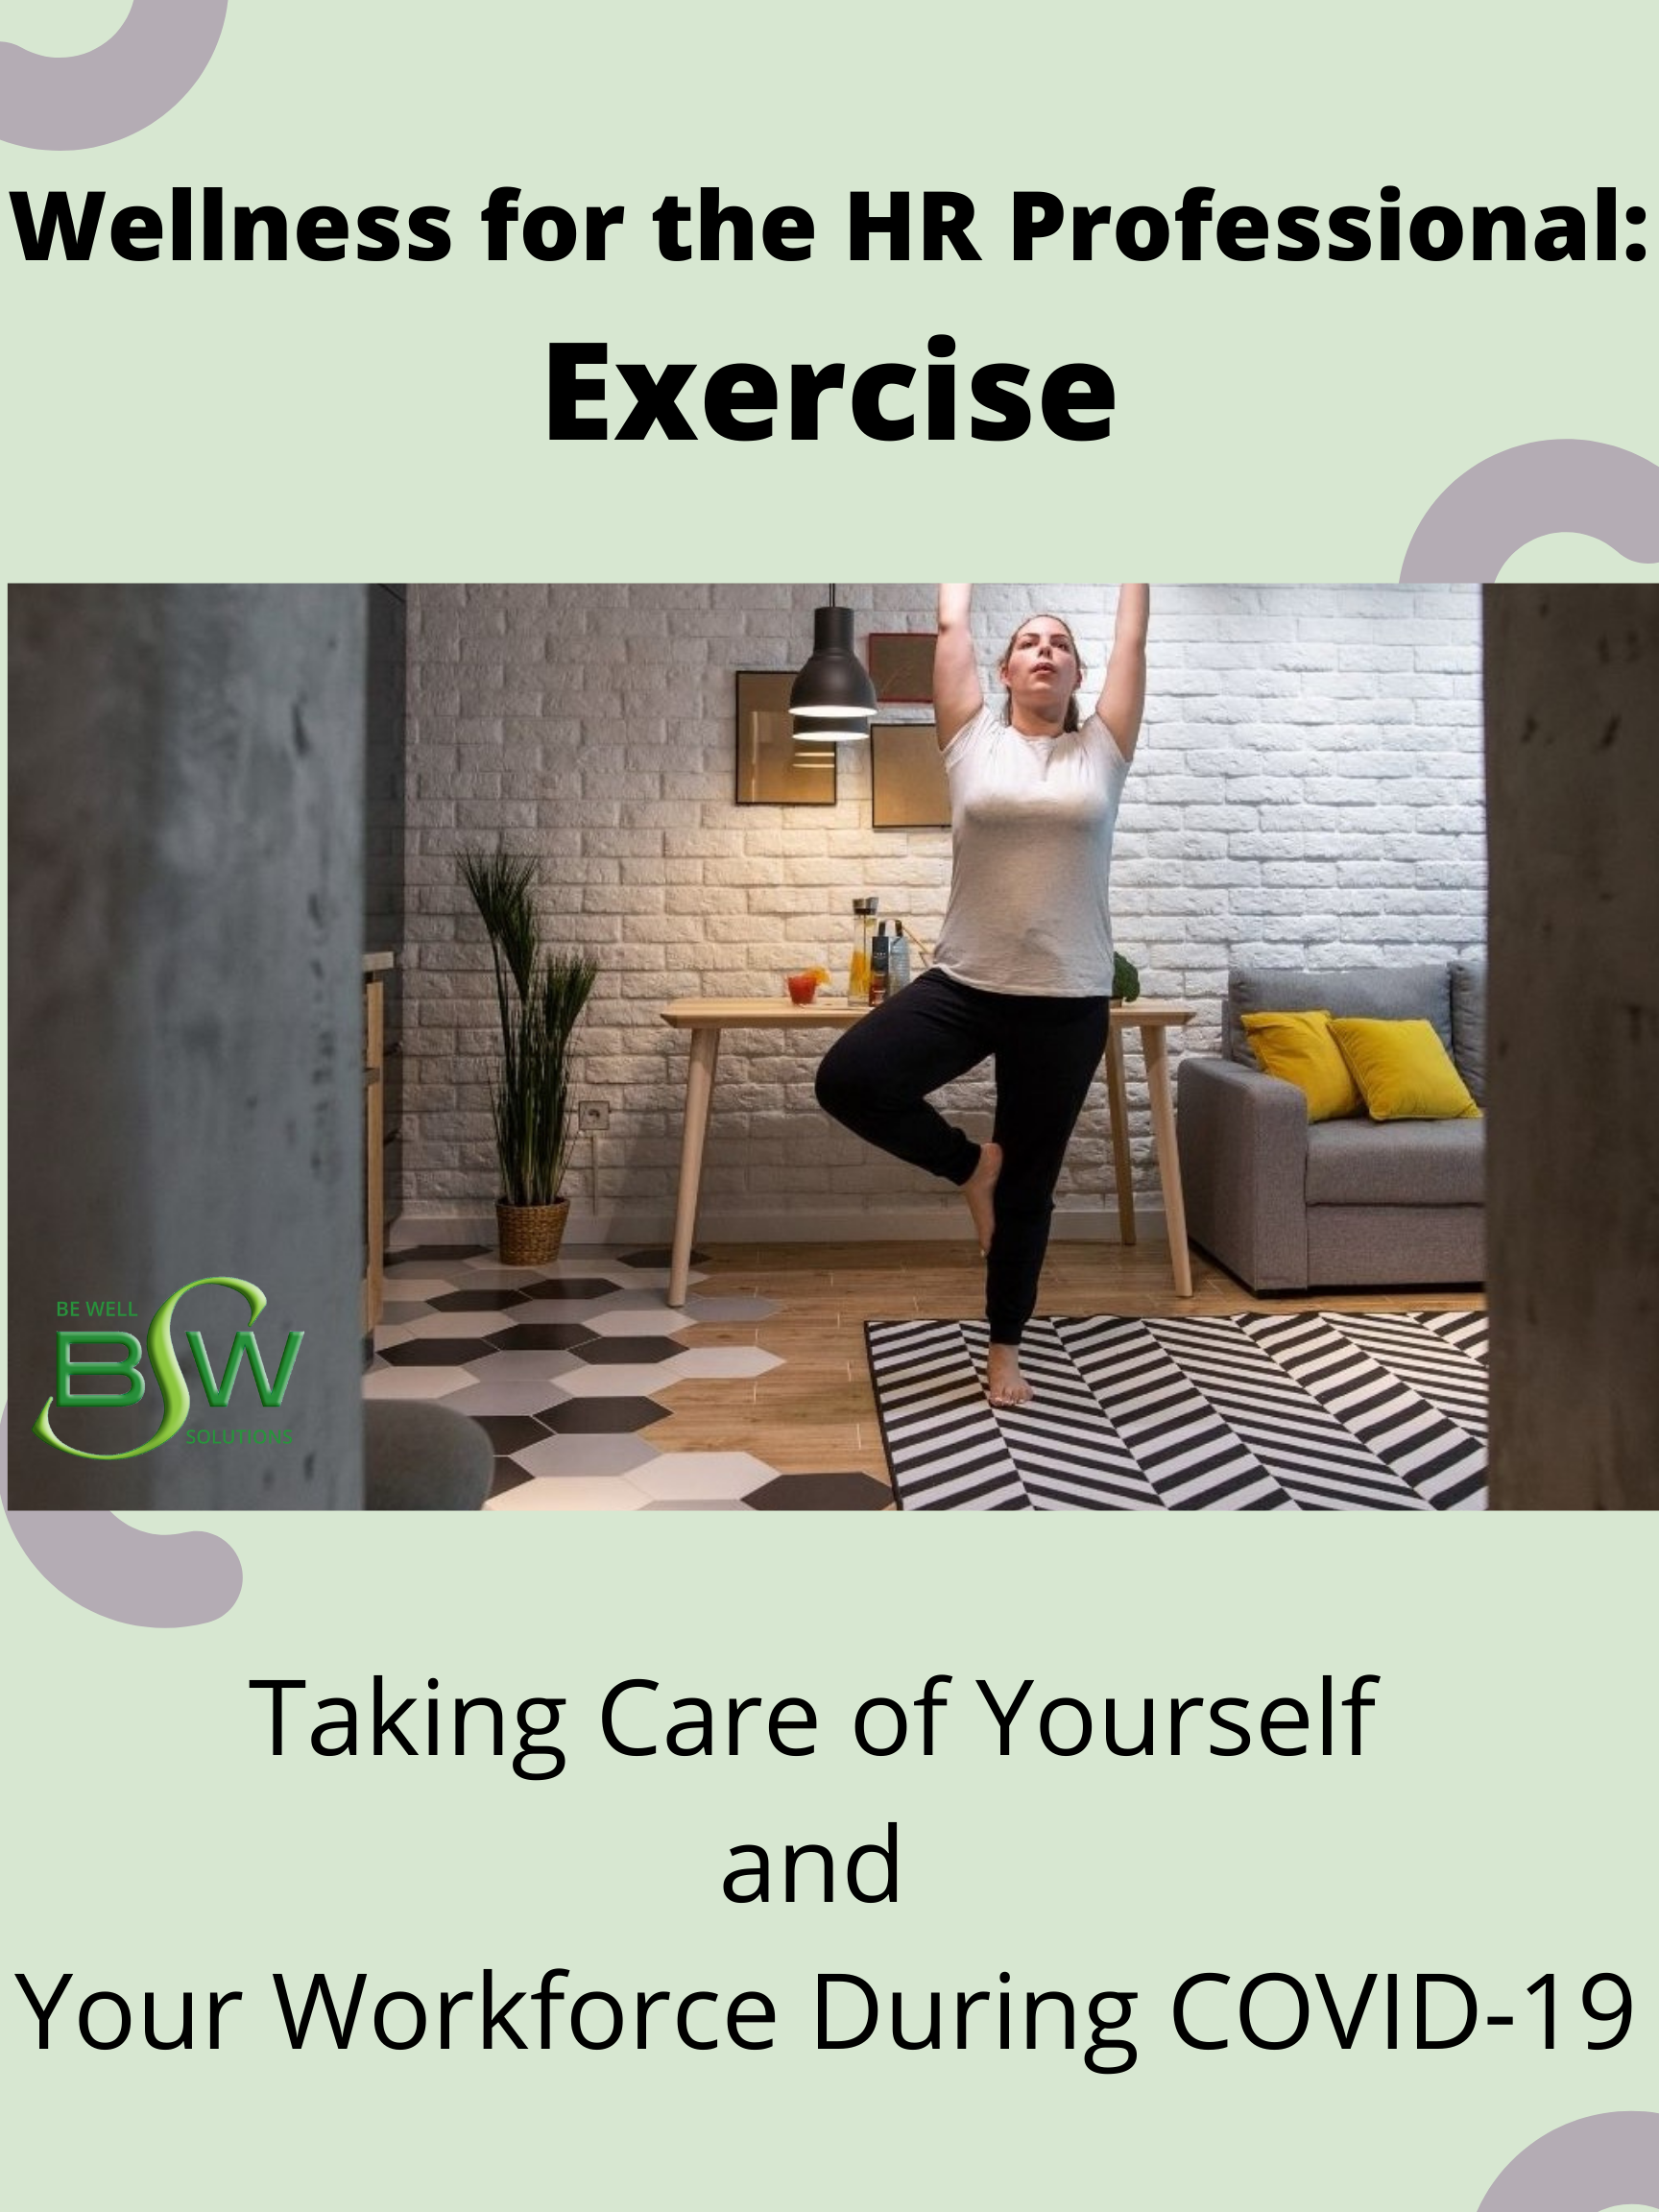 Wellness for the HR Professional: Exercise - Be Well Solutions